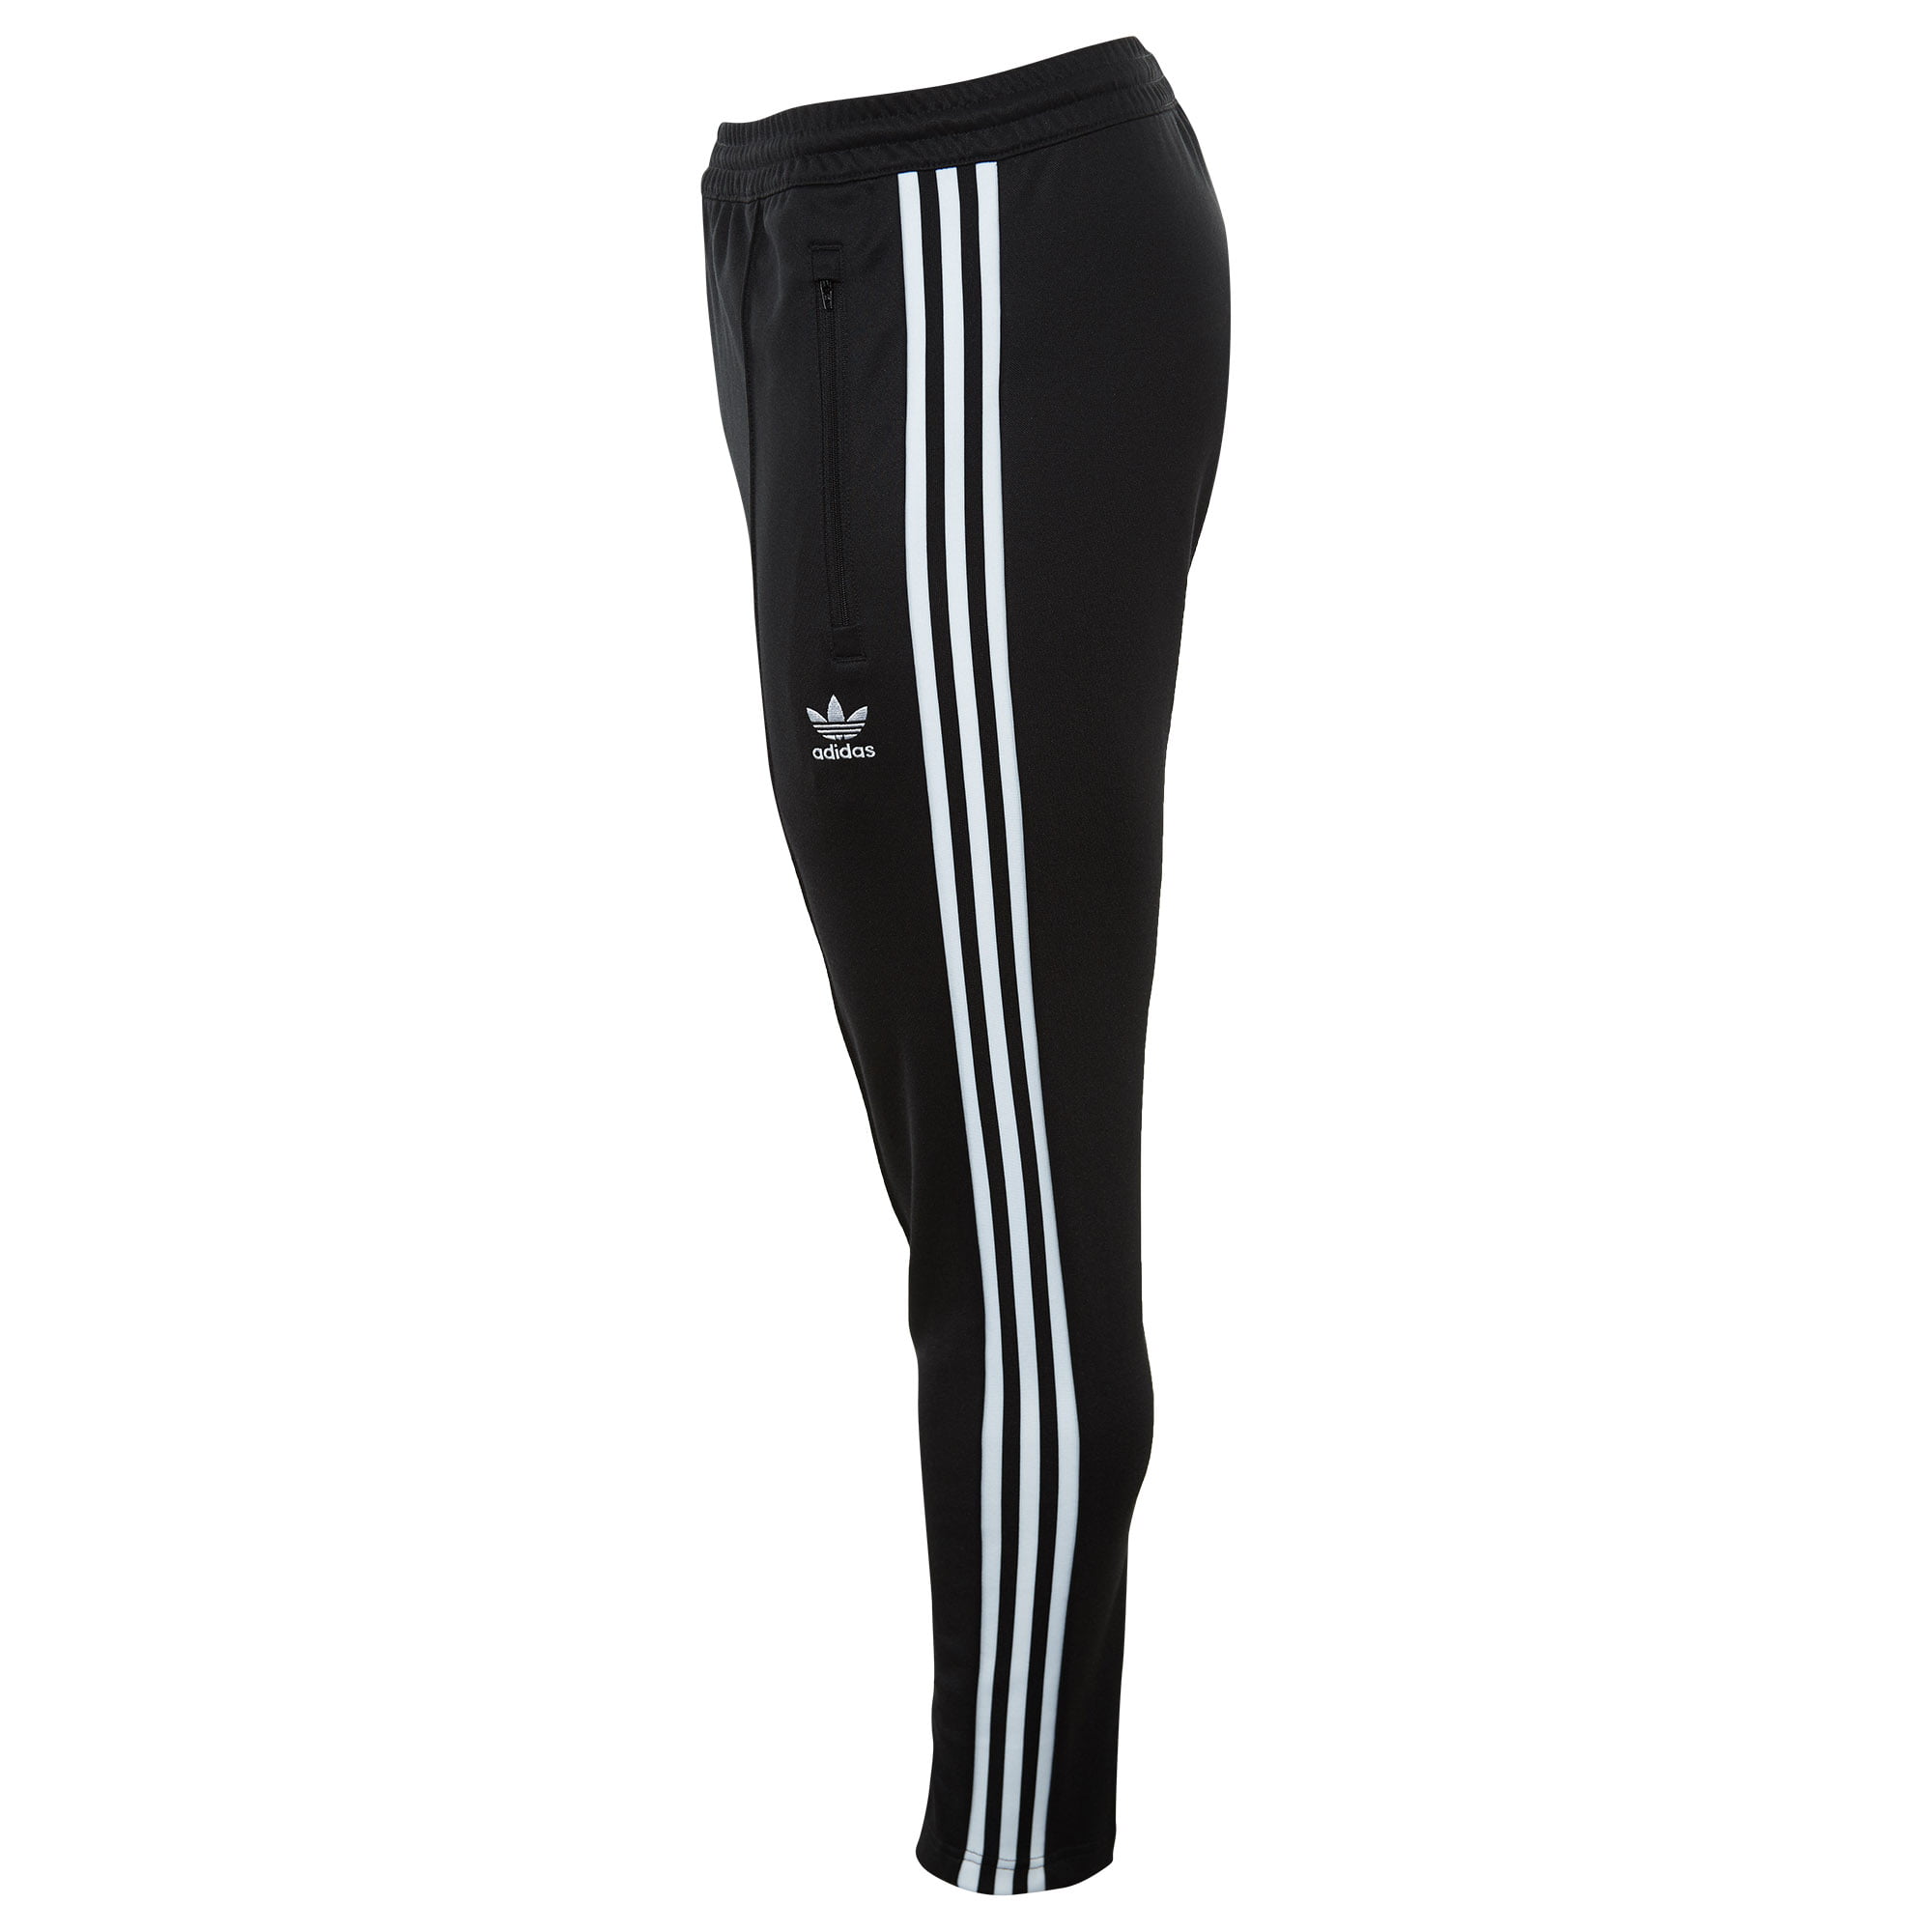 Slide View 1 adidas Authentic Wind Pant  Popular mens clothing Adidas  pants outfit Mens outfits